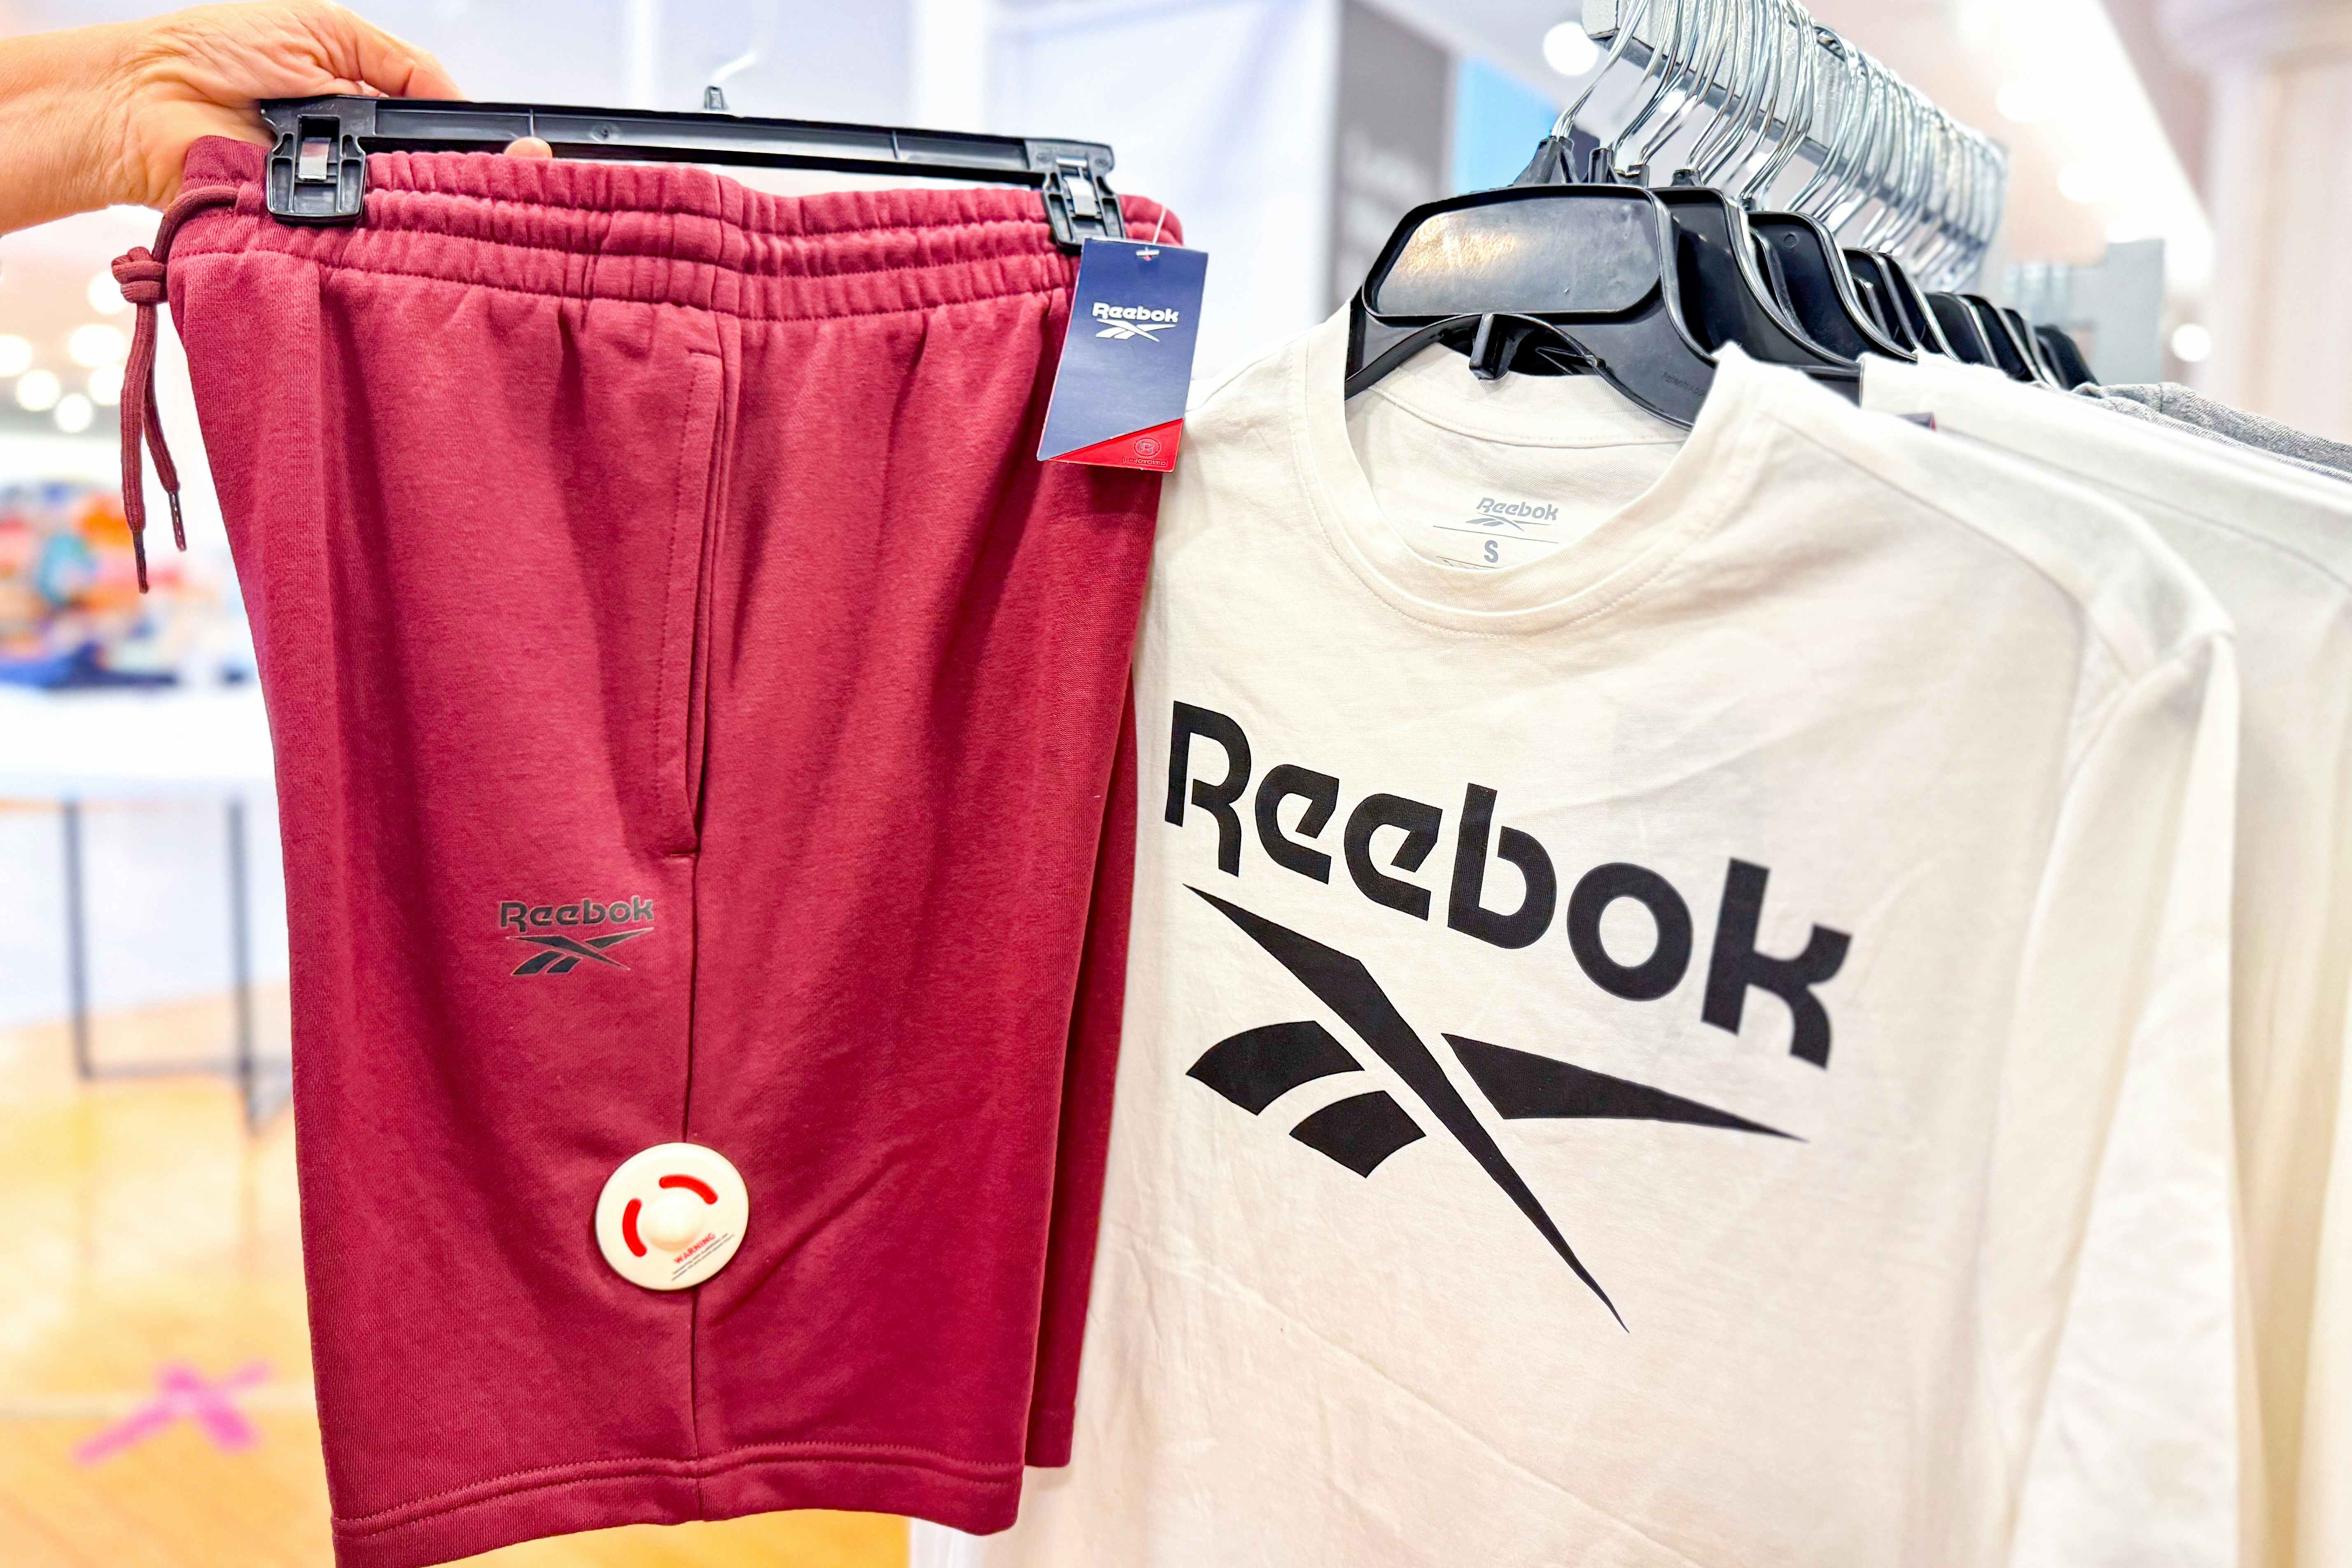 Reebok Extra 50% Off Sale: $20 Leggings, $28 Shoes, $10 Shorts, and More